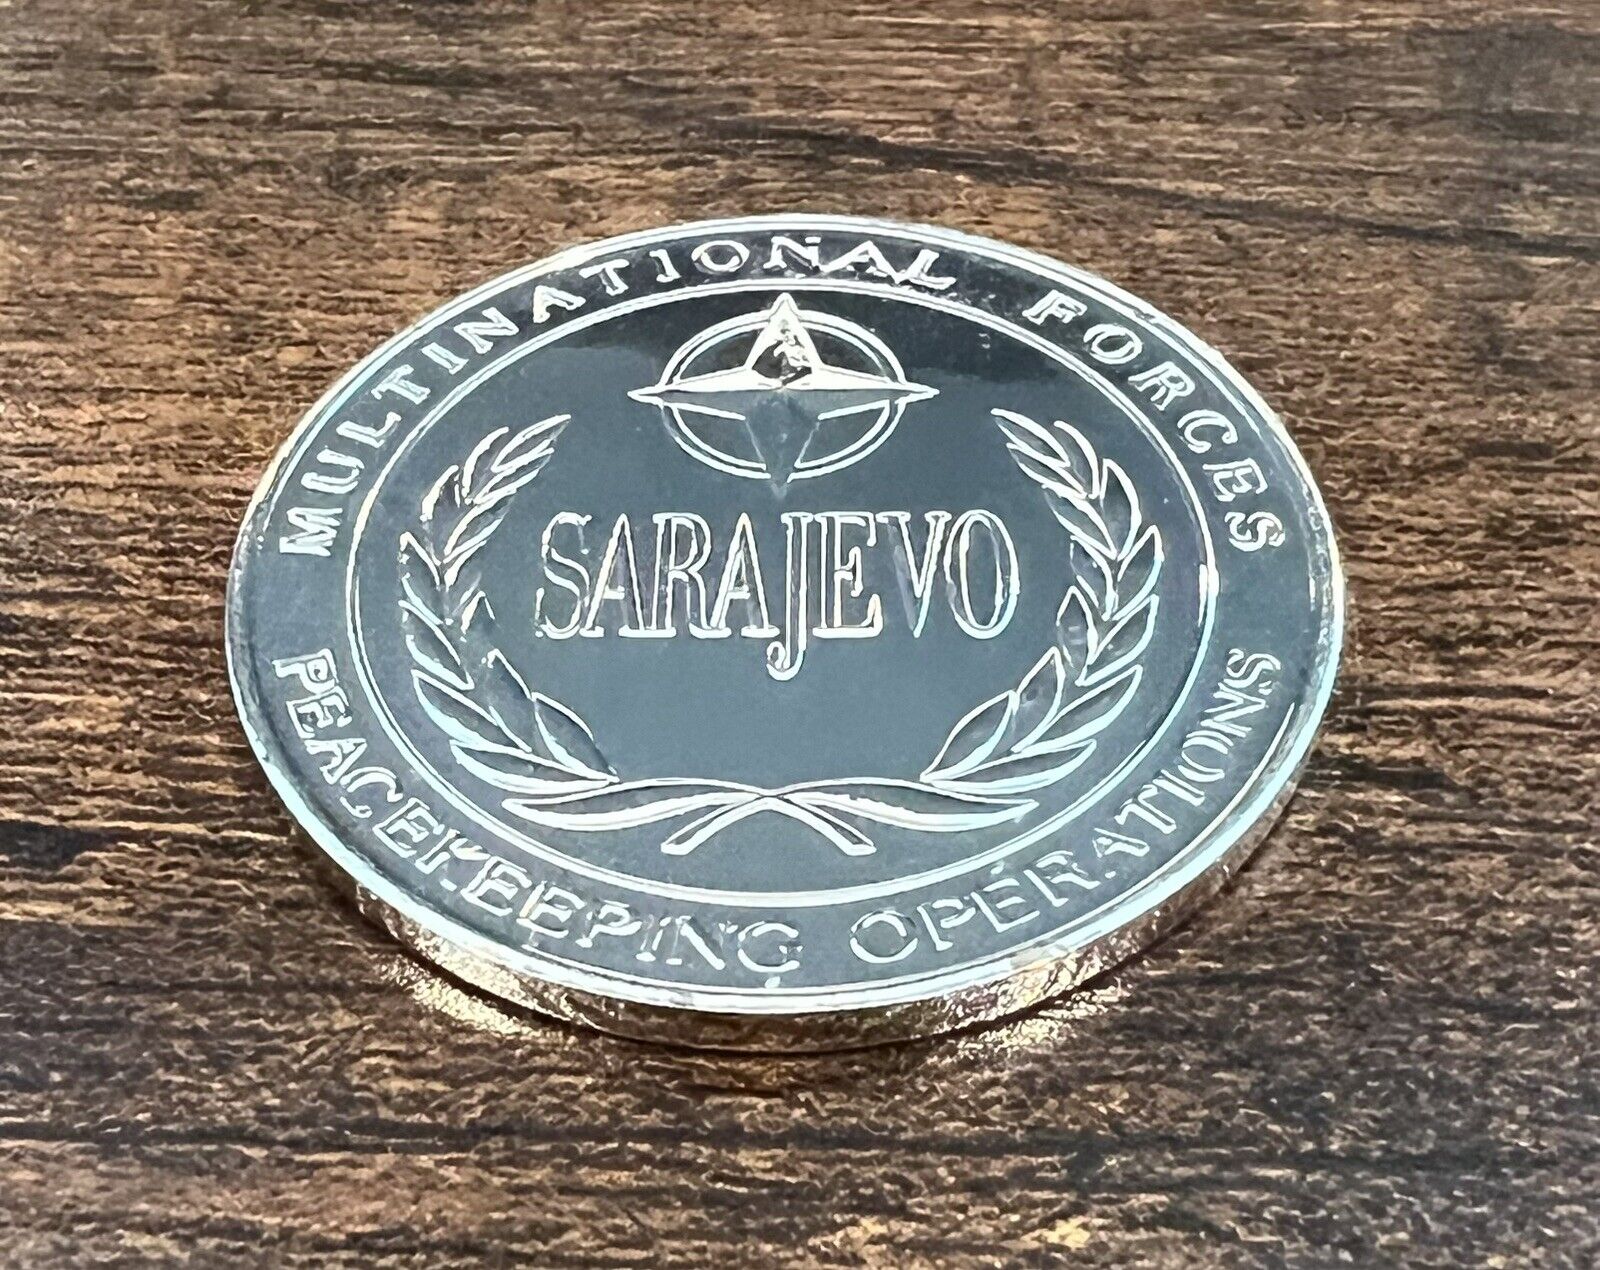 Sarajevo Multinational Forces Peacekeeping Operations Service Challenge Coin